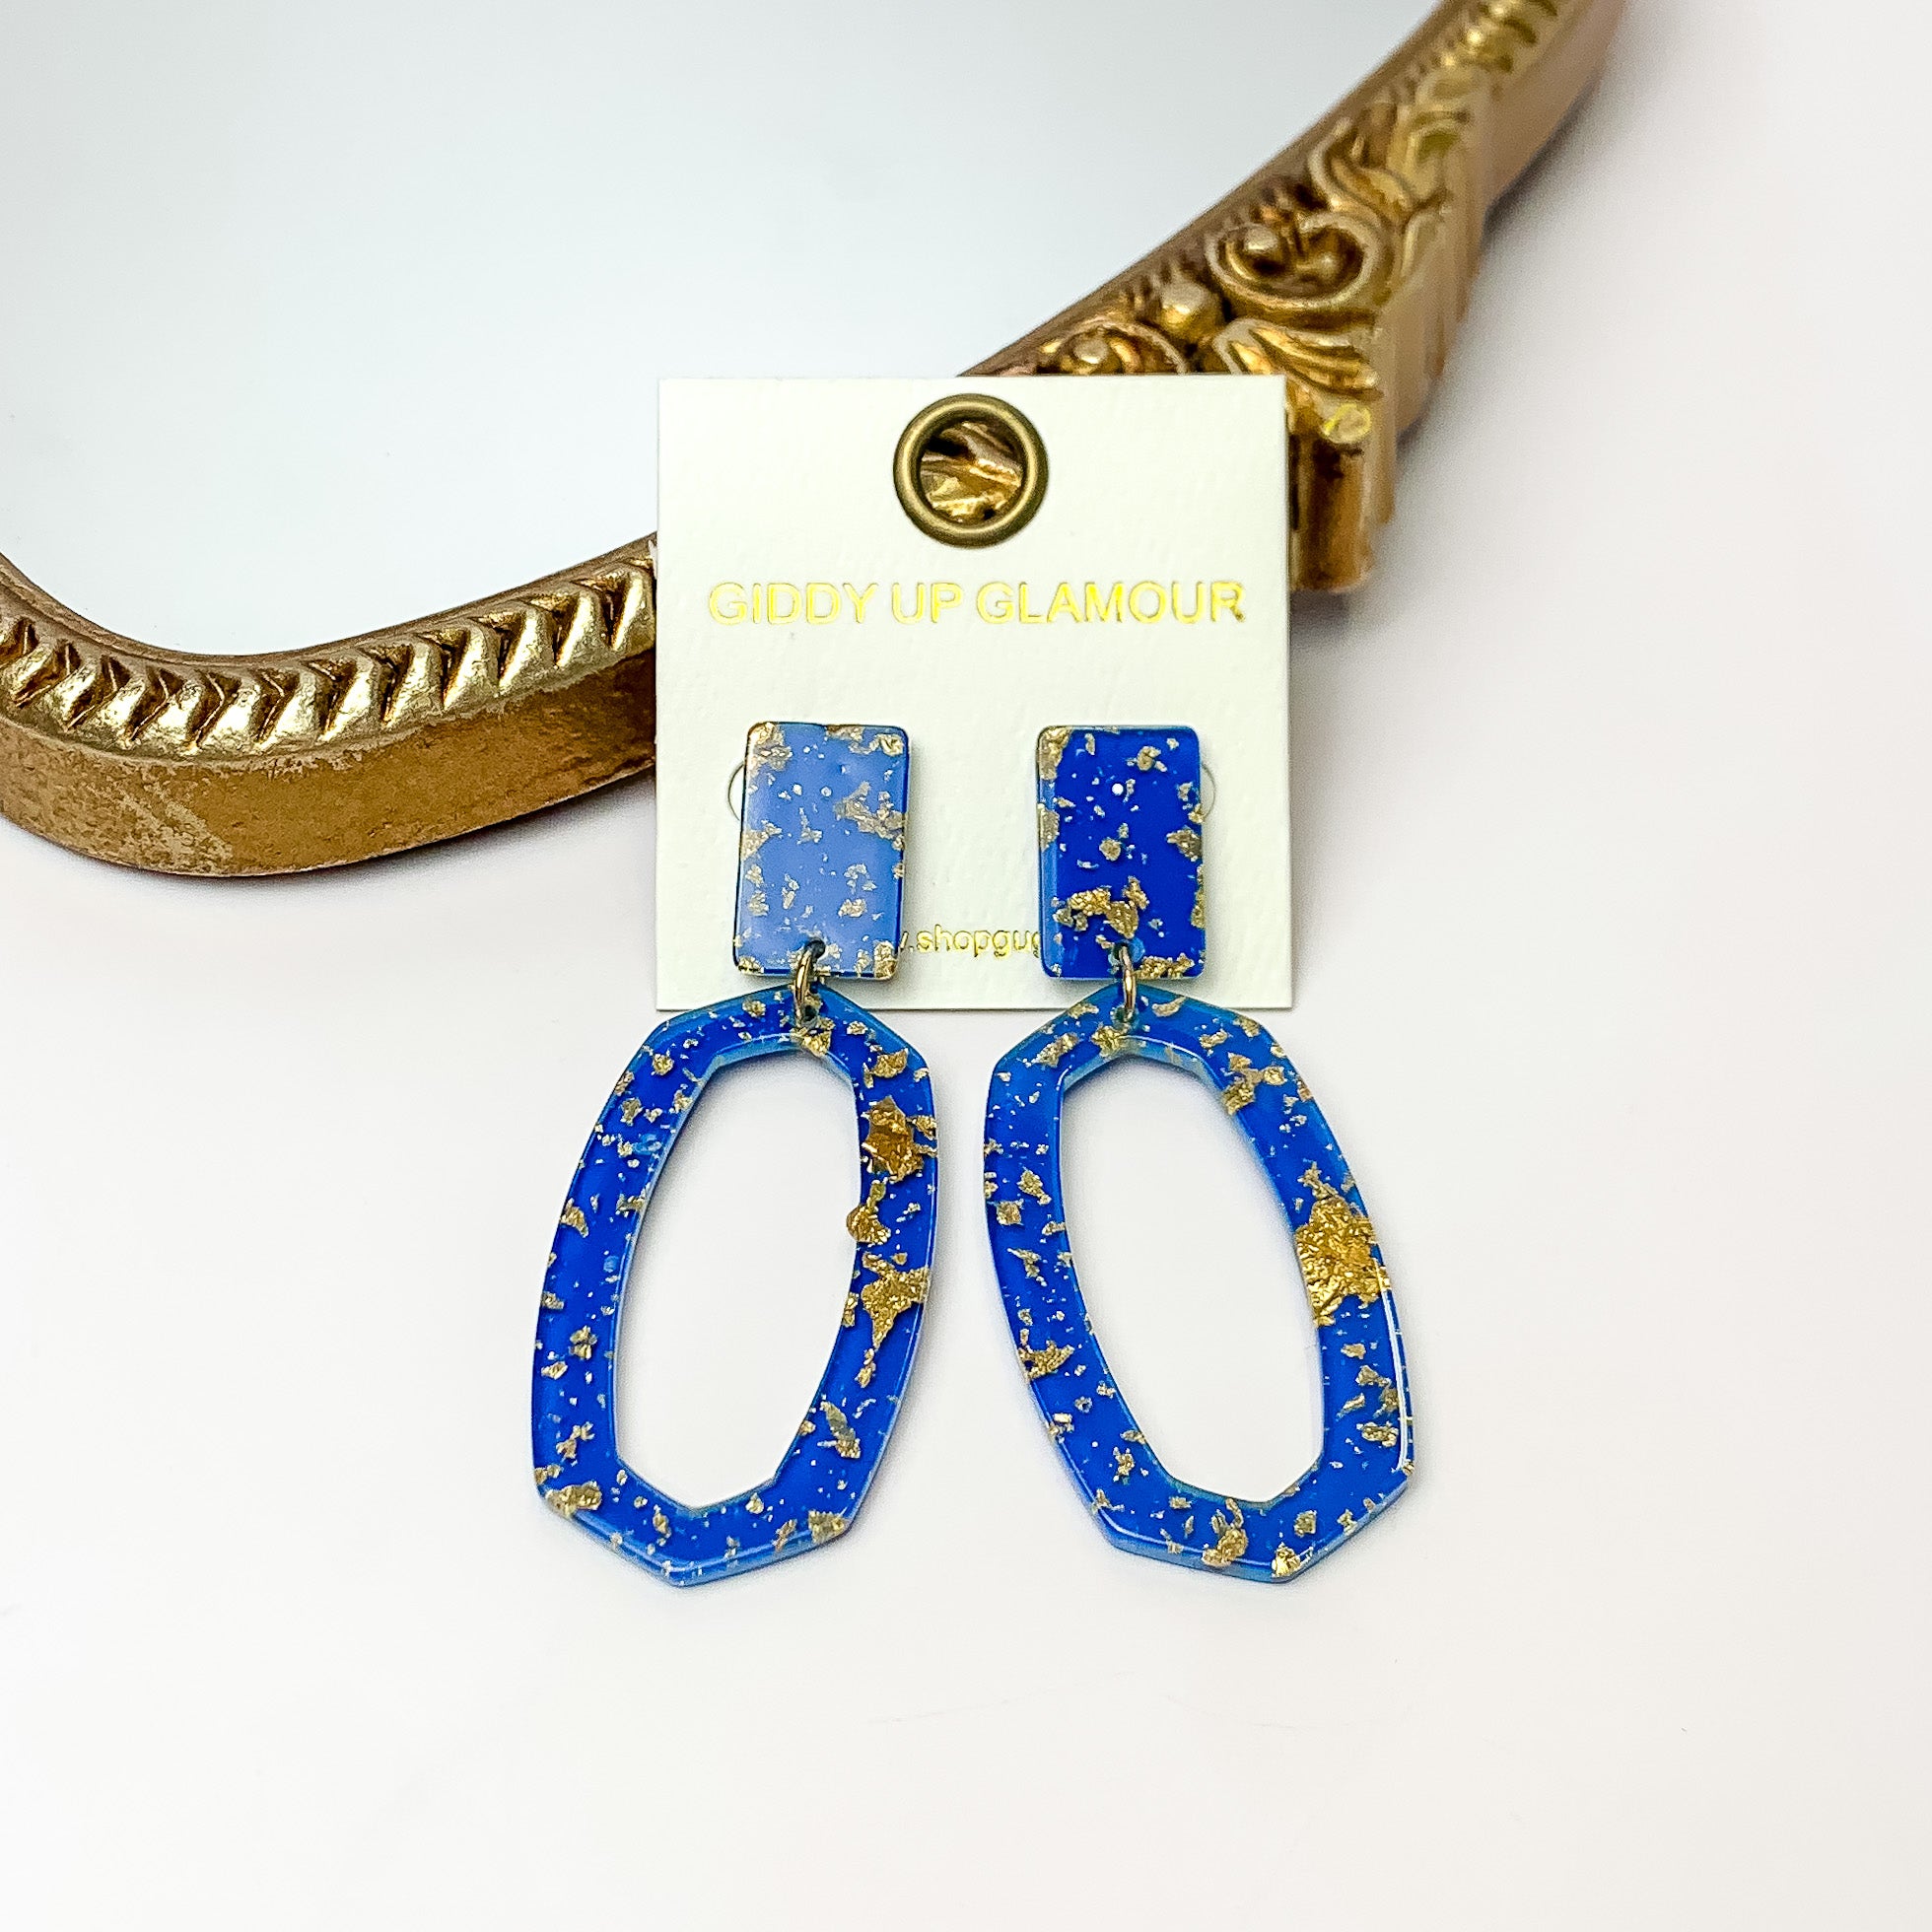 Miami Marble Open Oval Earrings in Royal Blue. Pictured on a white background with the earrings against a gold frame.